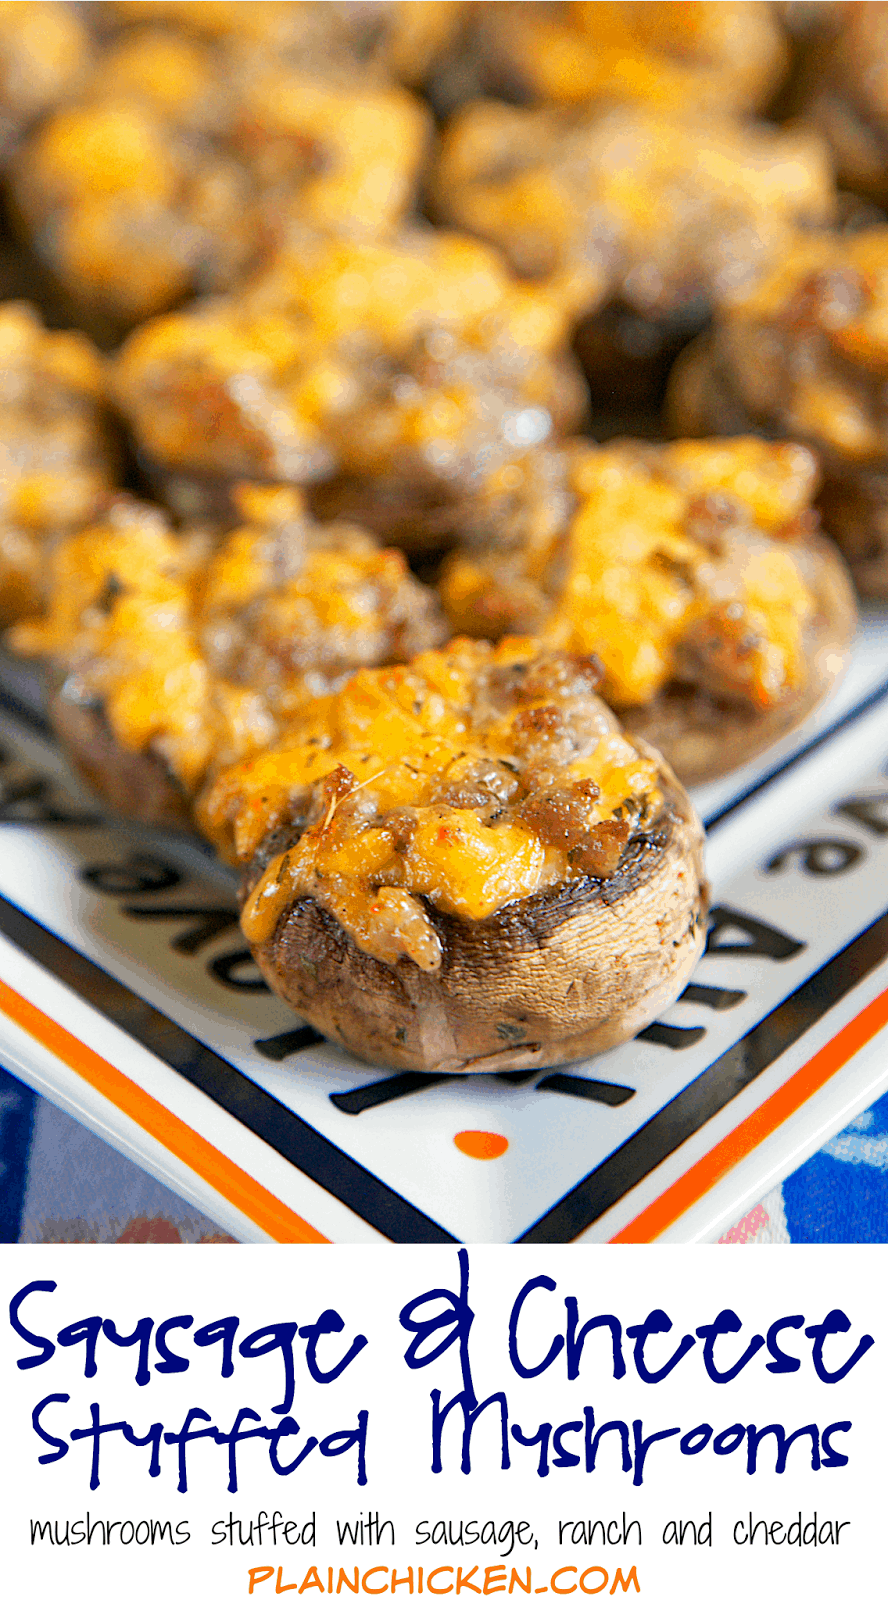 Sausage and Cheese Stuffed Mushrooms recipe - mushroom caps stuffed with sausage, cheese, ranch and red pepper - can make sausage mixture ahead of time and stuff mushrooms when ready to bake. Took these to a party and they were gone in a flash!